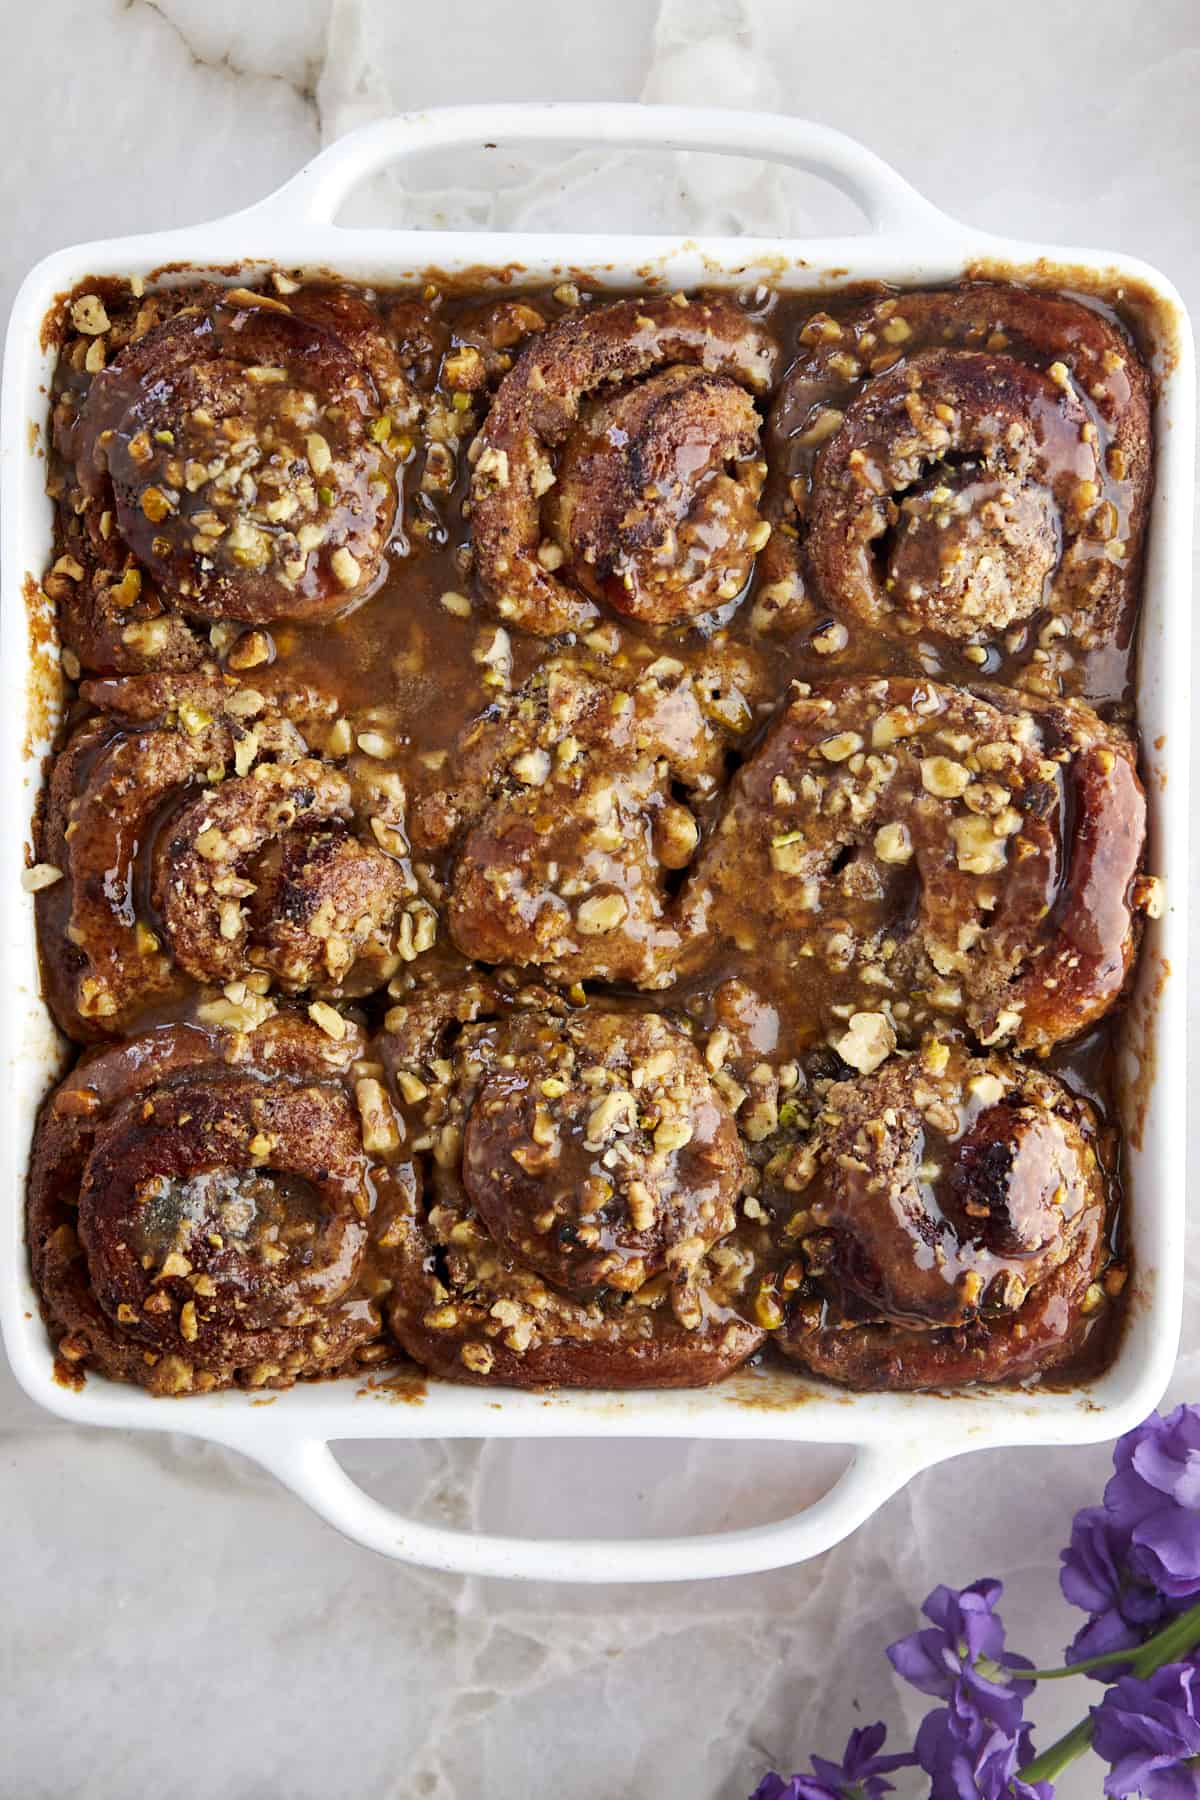 Baked cinnamon rolls with nuts